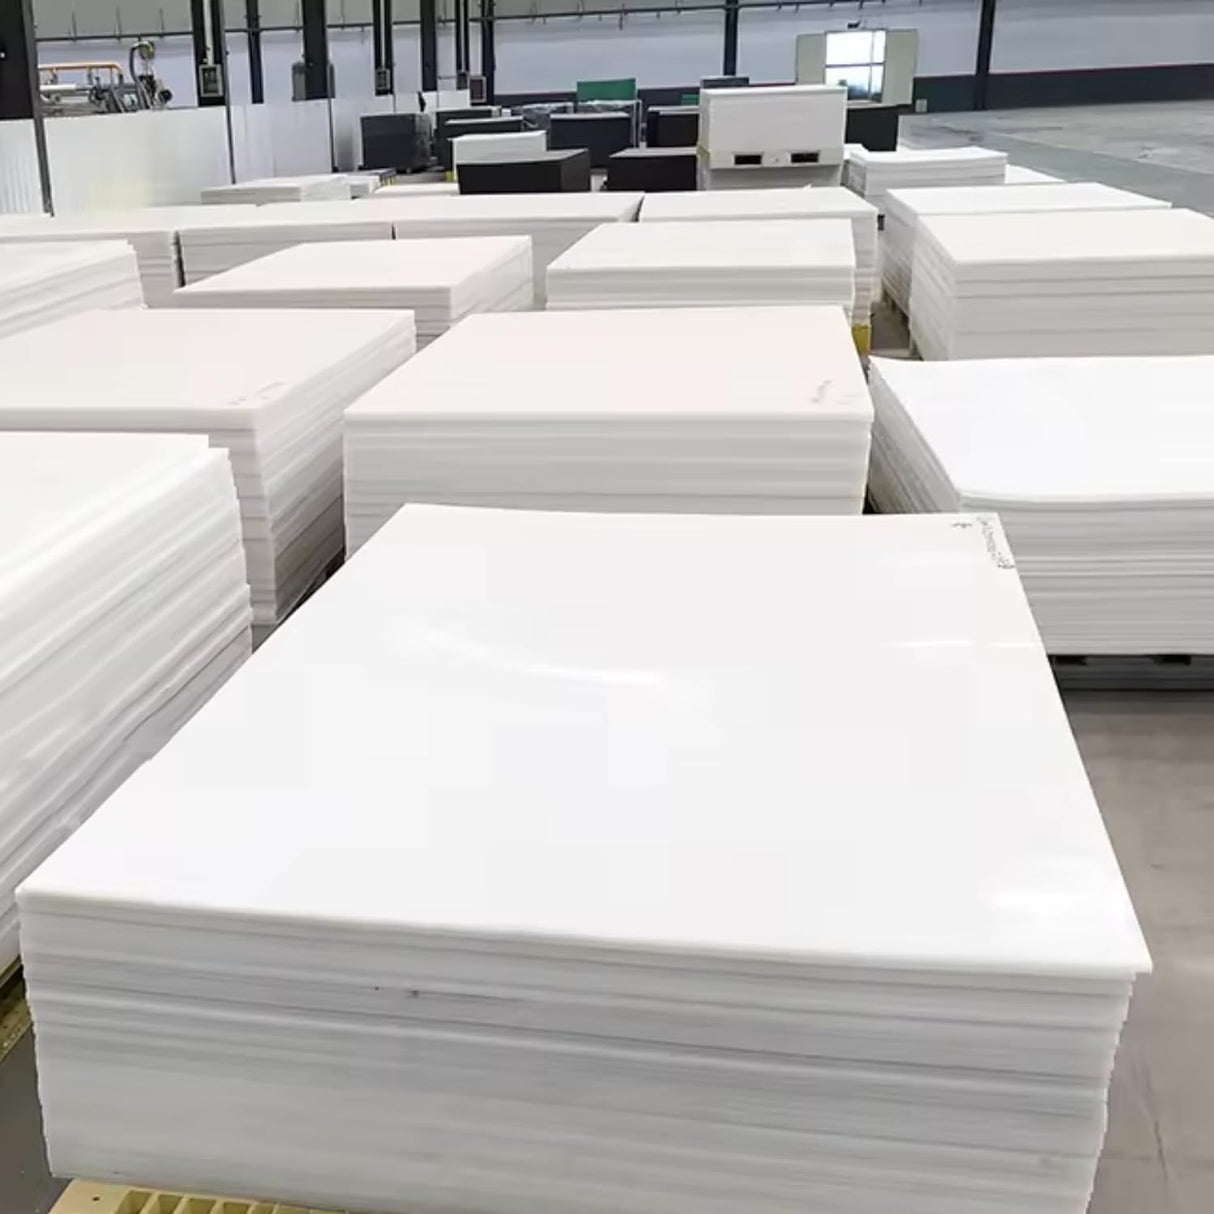 Singhal HDPE Sheet 50 x 50 CM Size High-Density Polyethylene Food Grade Lightweight High Tensile Strength Suitable For Chemical Tanks, DIY, and more. Milky White, 500 x 500 mm, 5 MM Thickness - 2 Pcs